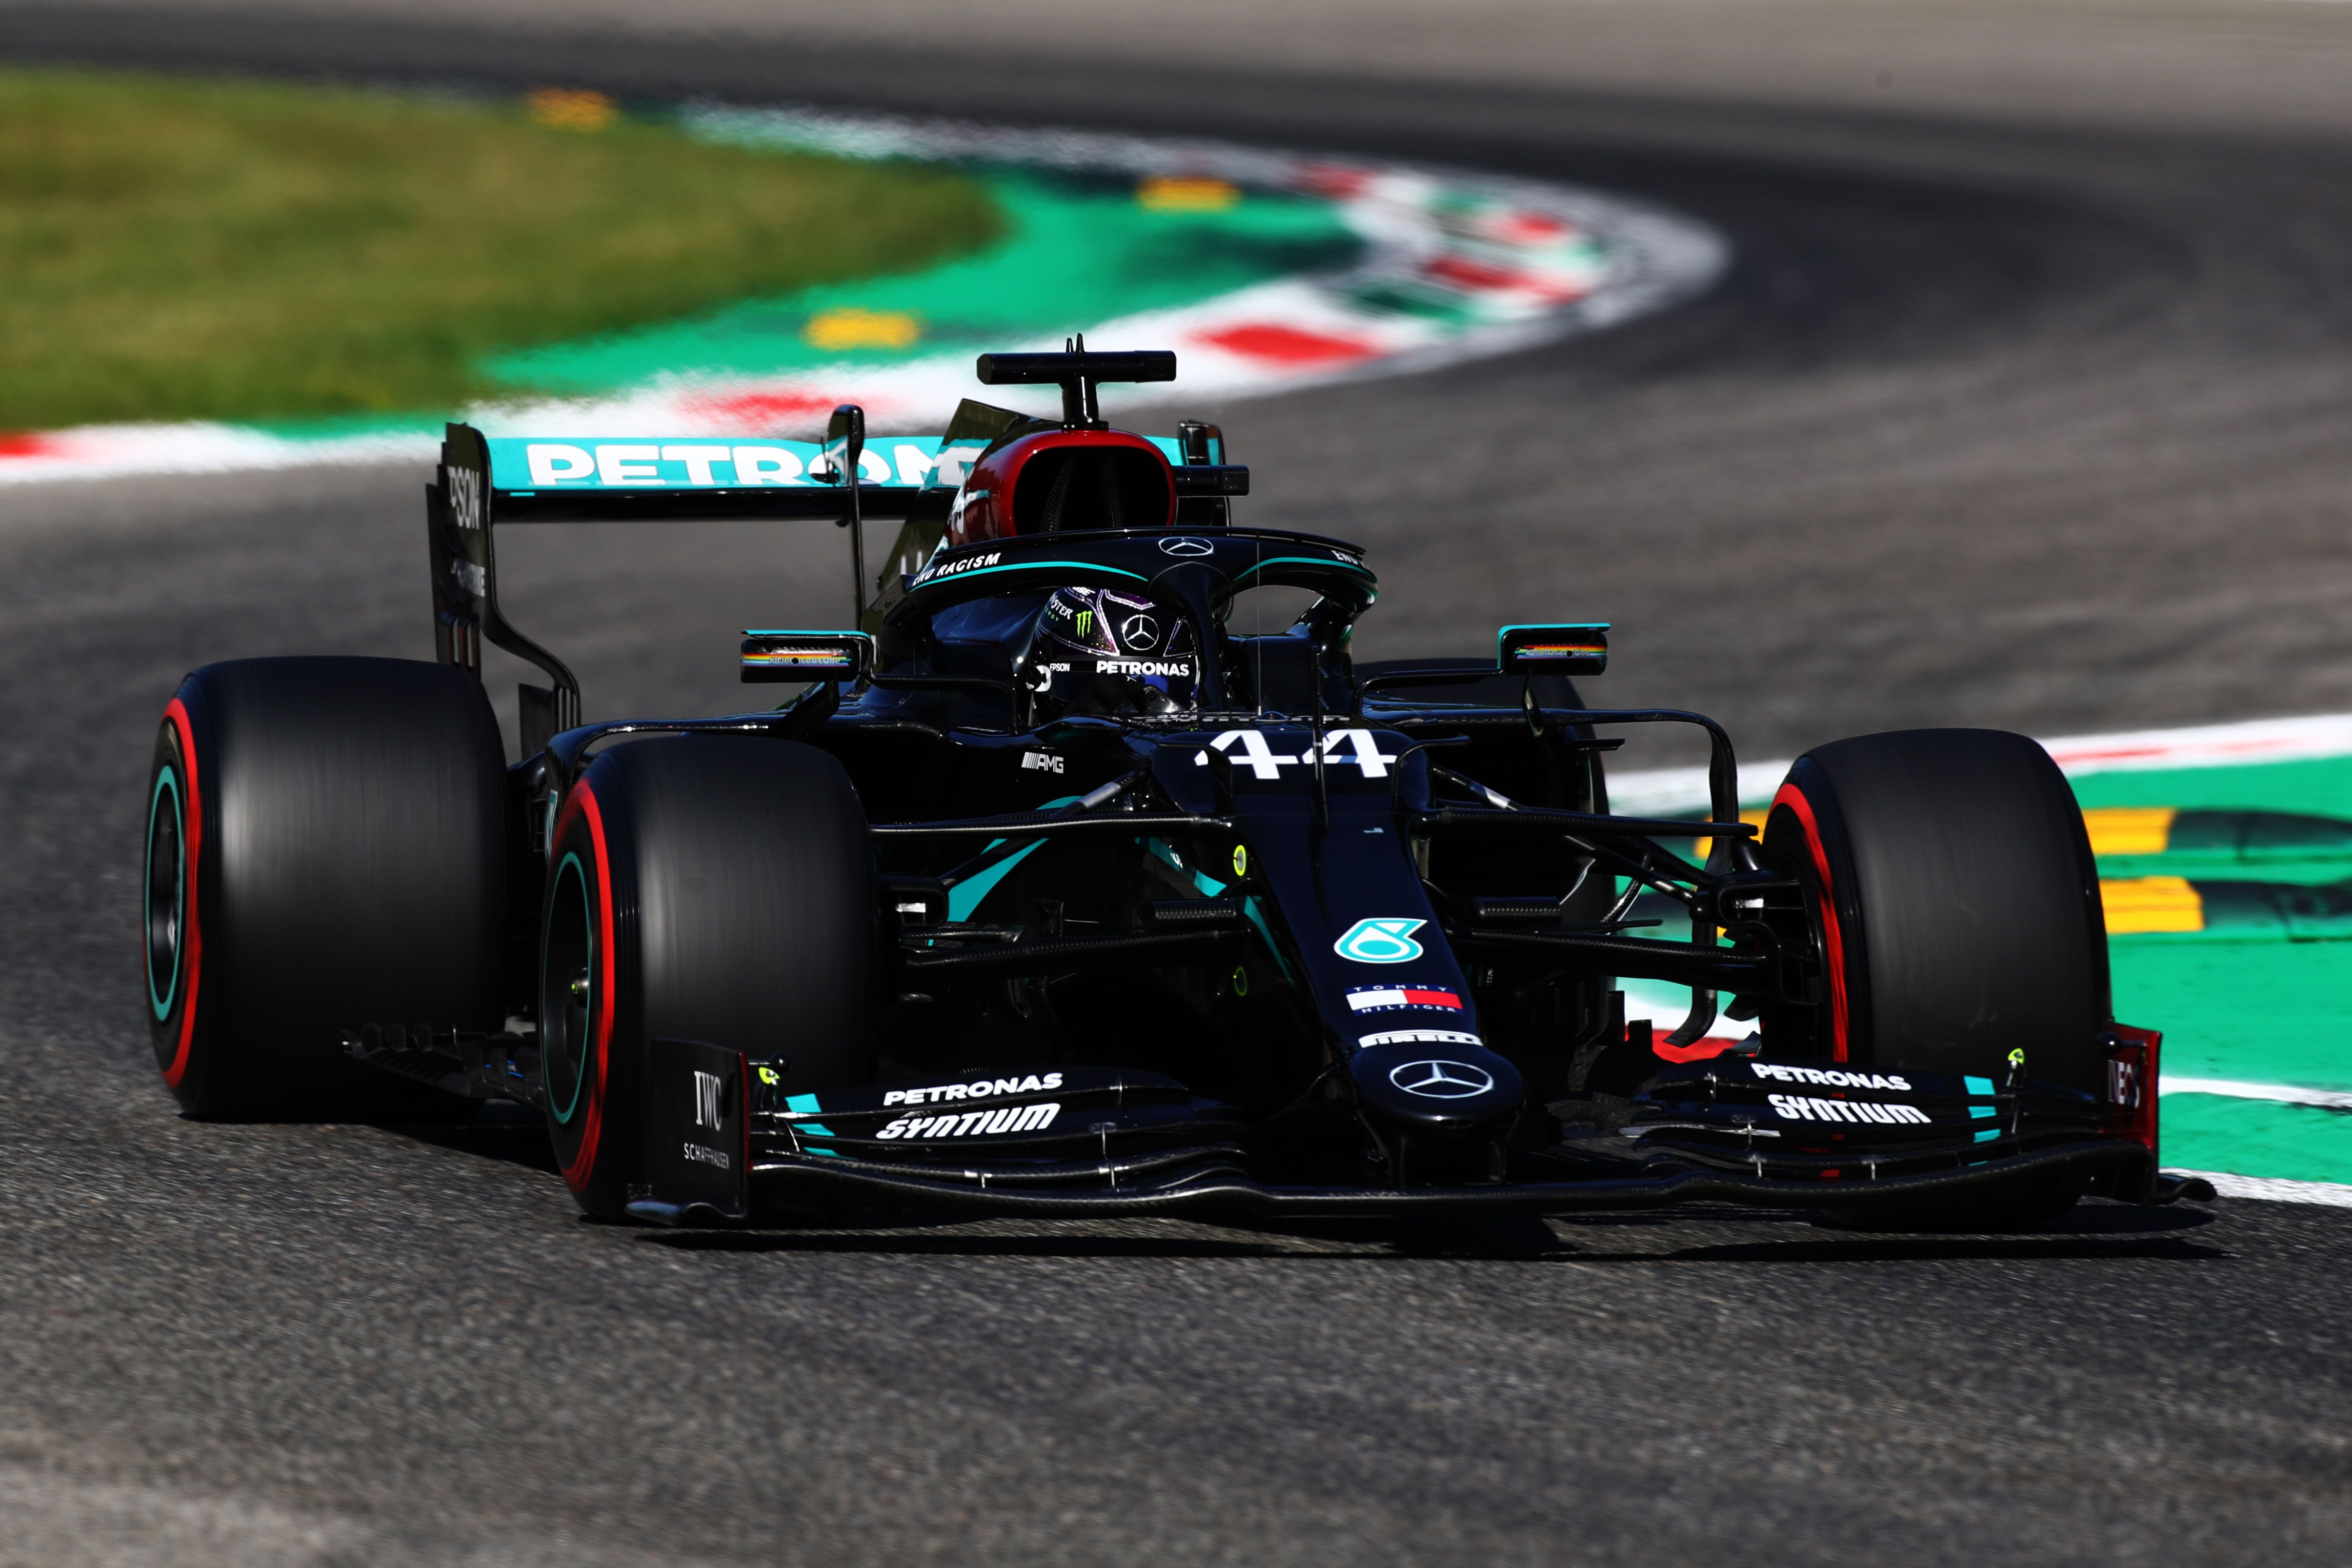 F1 Italian Grand Prix Qualifying Results Lewis Hamilton leads Mercedes to latest front row sweep